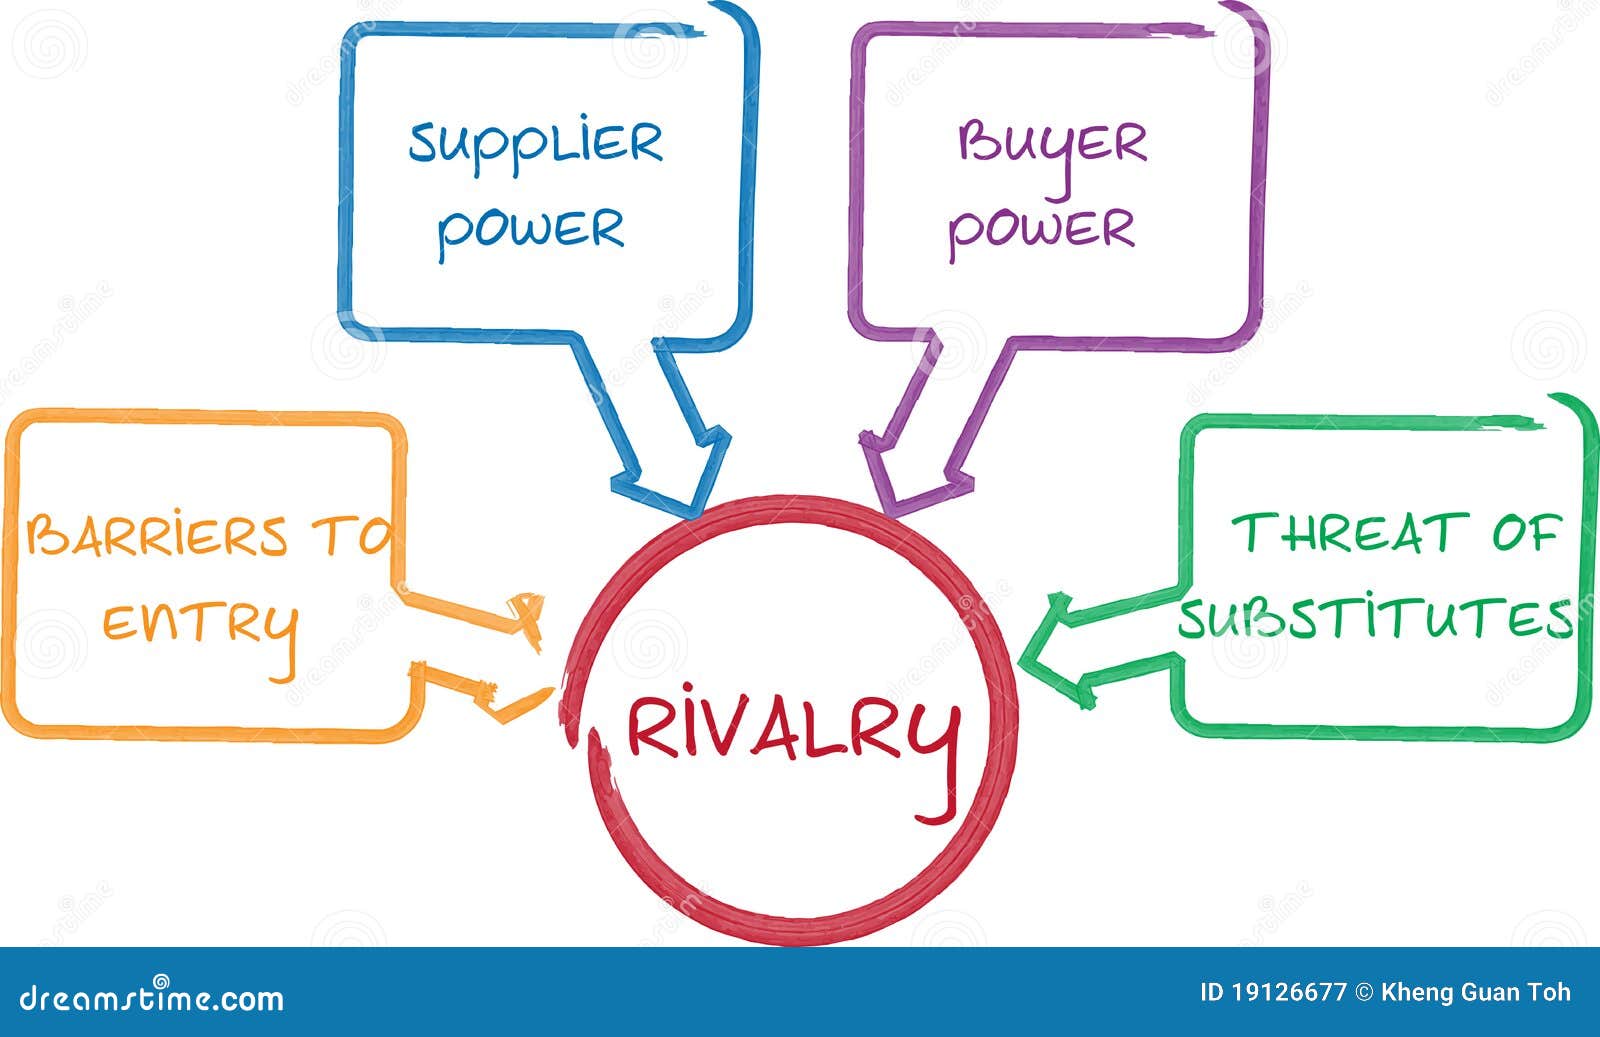 competitive rivalry business diagram